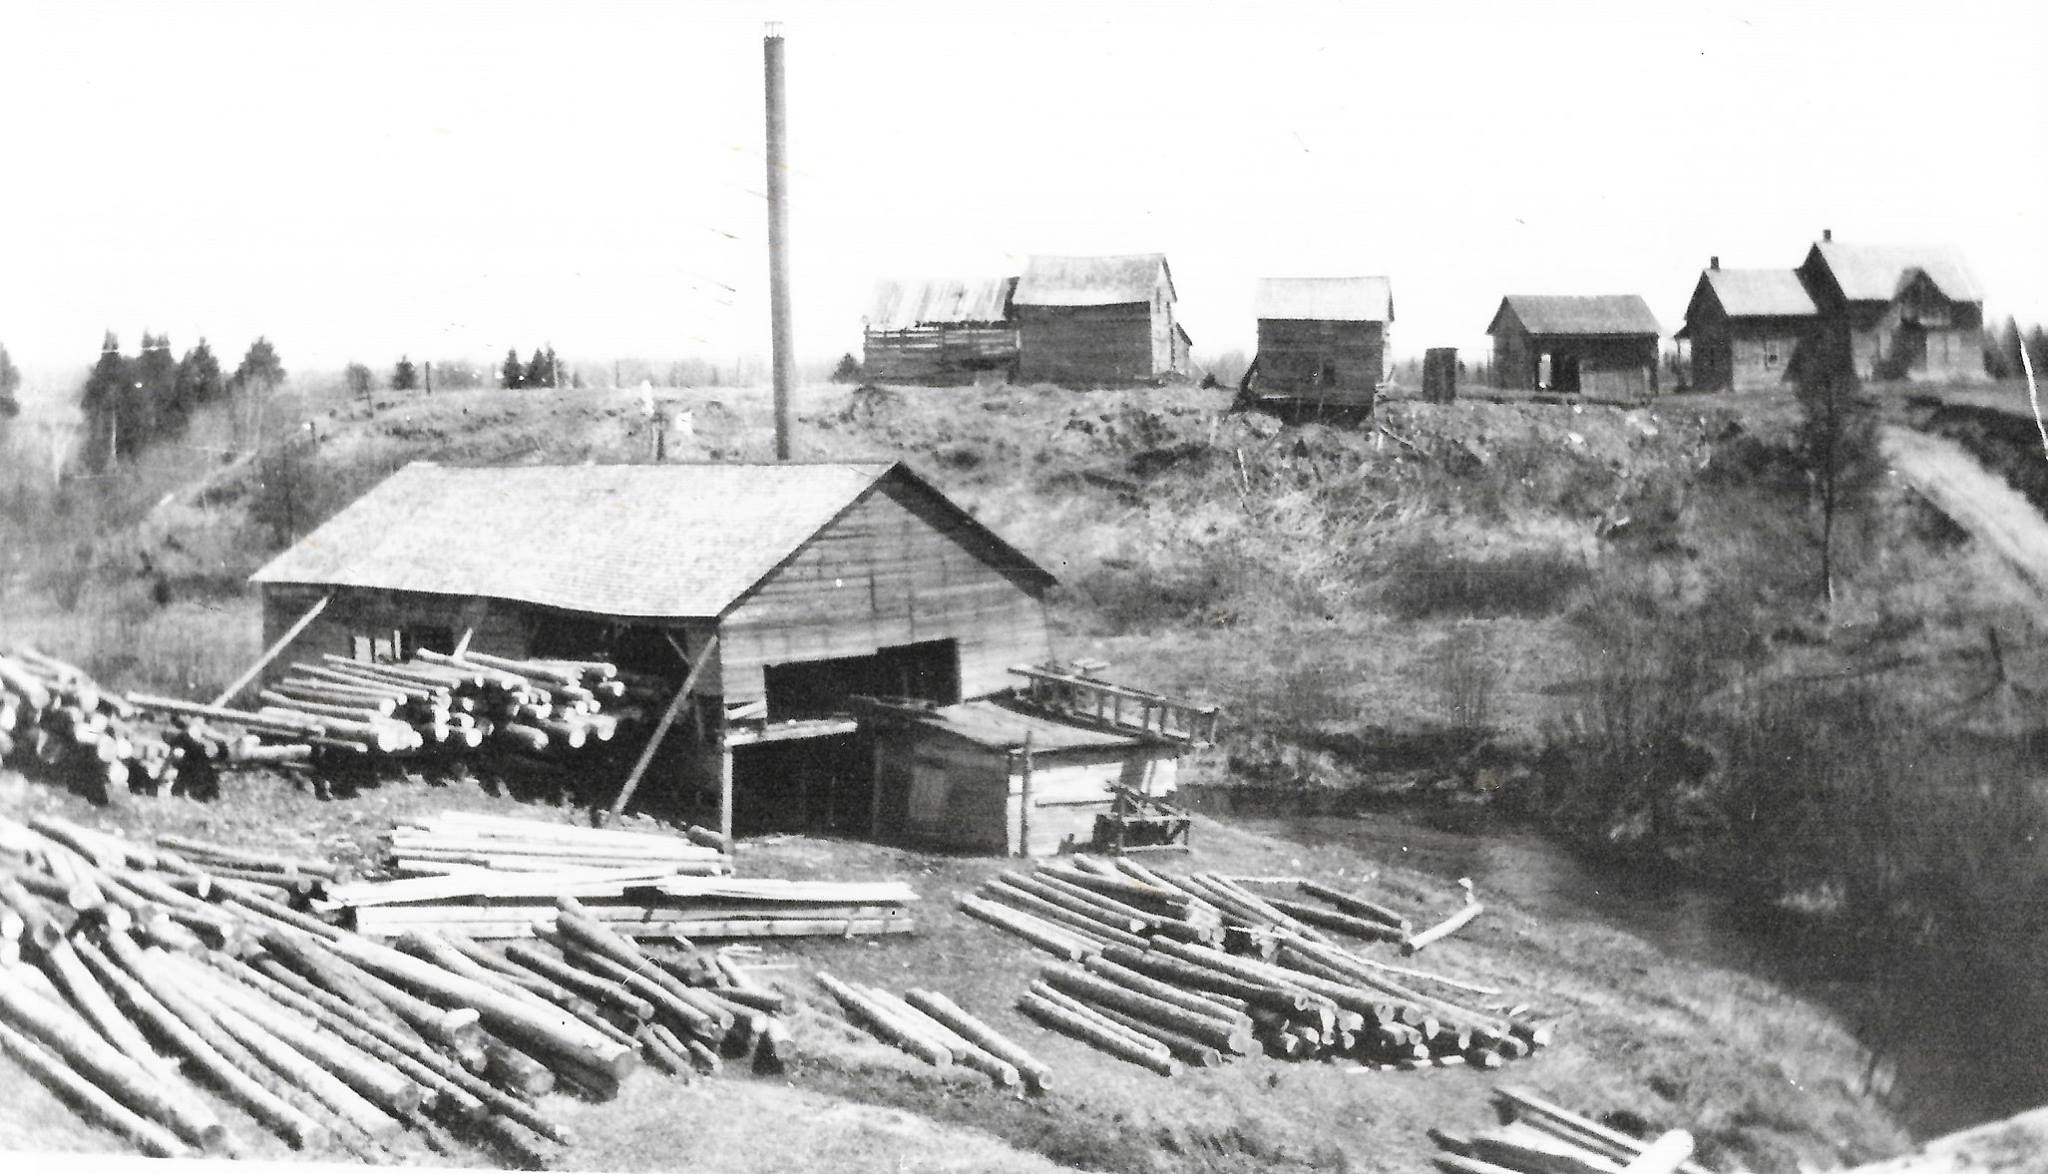 an old black and white photo of the Desaulniers sawmill; several small, simple wooden buildings surrounded by small trees and brush, and a lumberyard full of stacks of long logs.